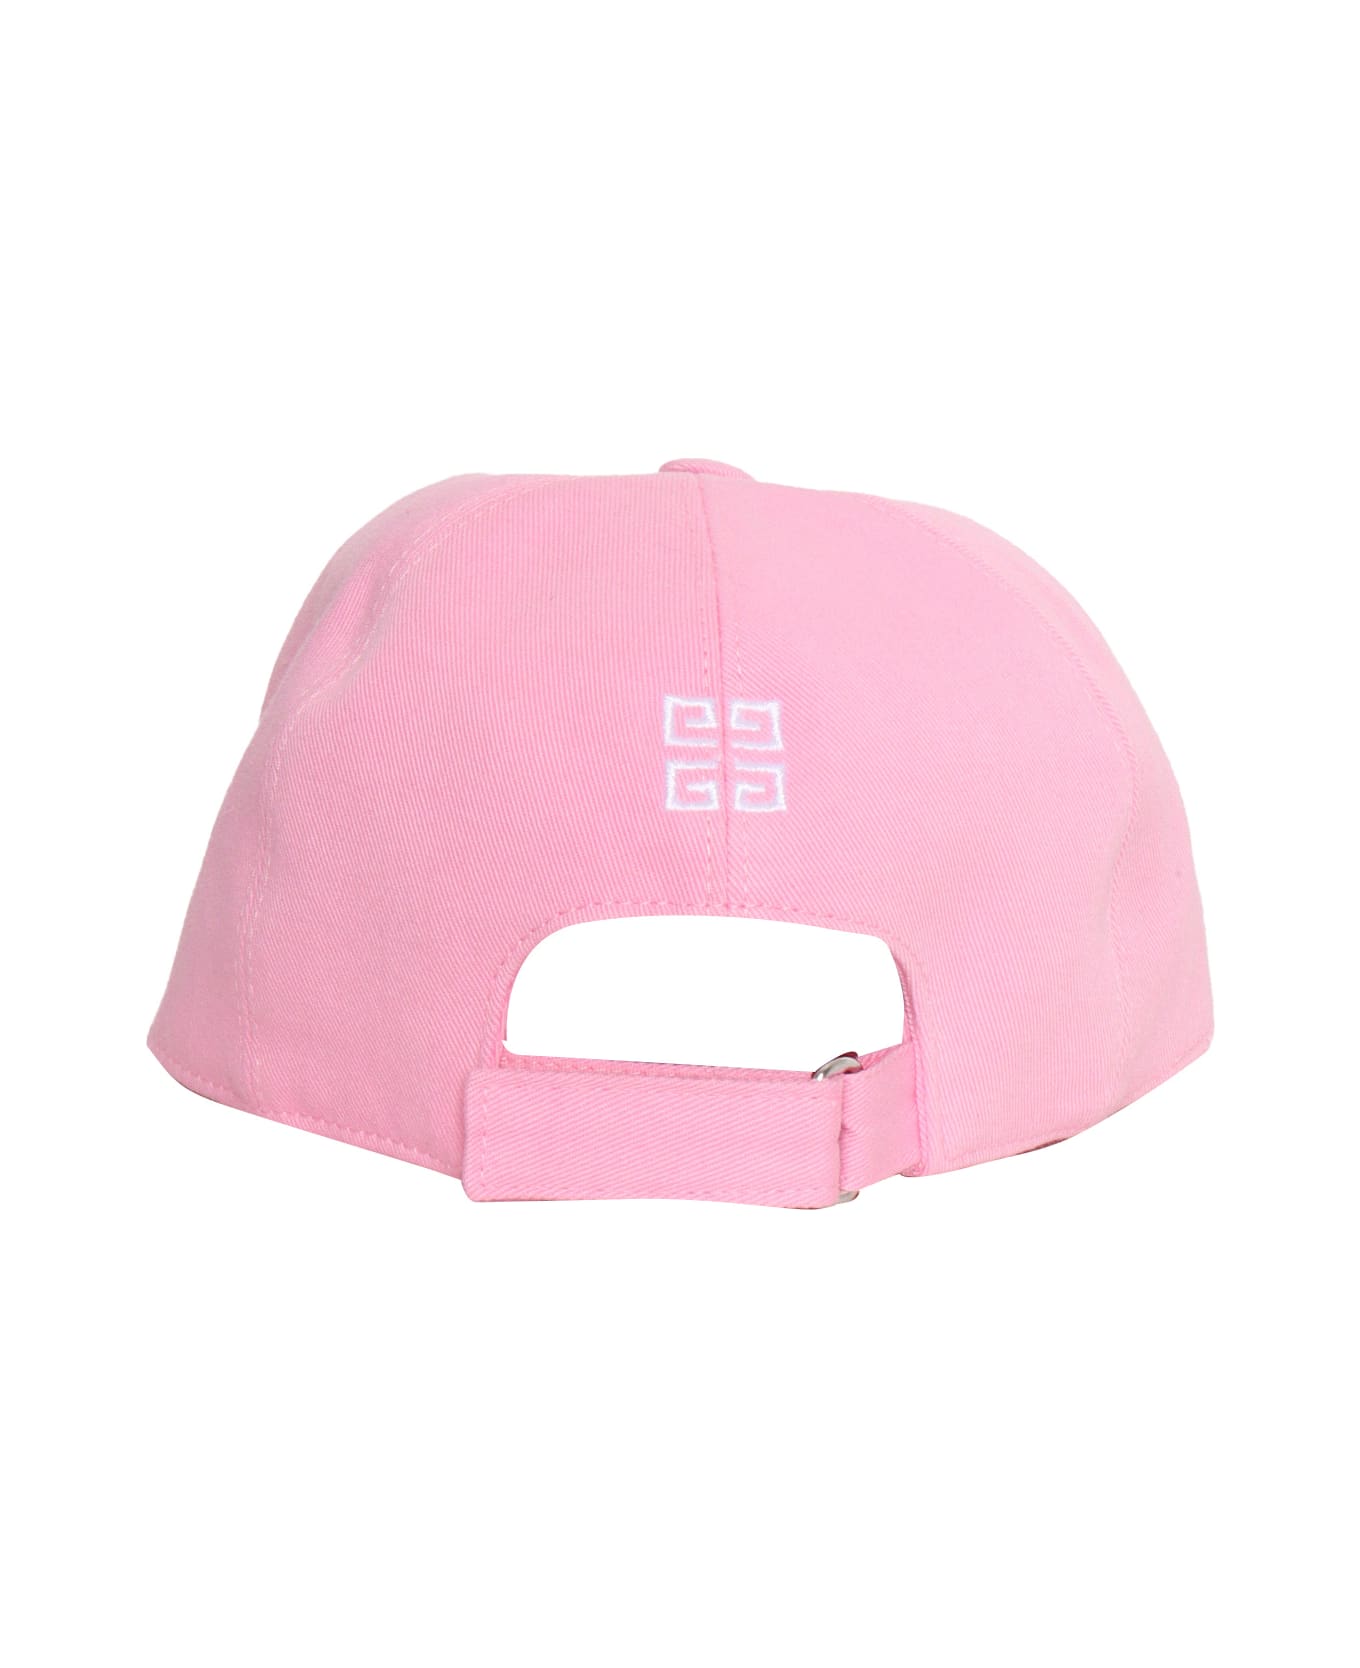 Givenchy Pink Cap With Logo - PINK アクセサリー＆ギフト